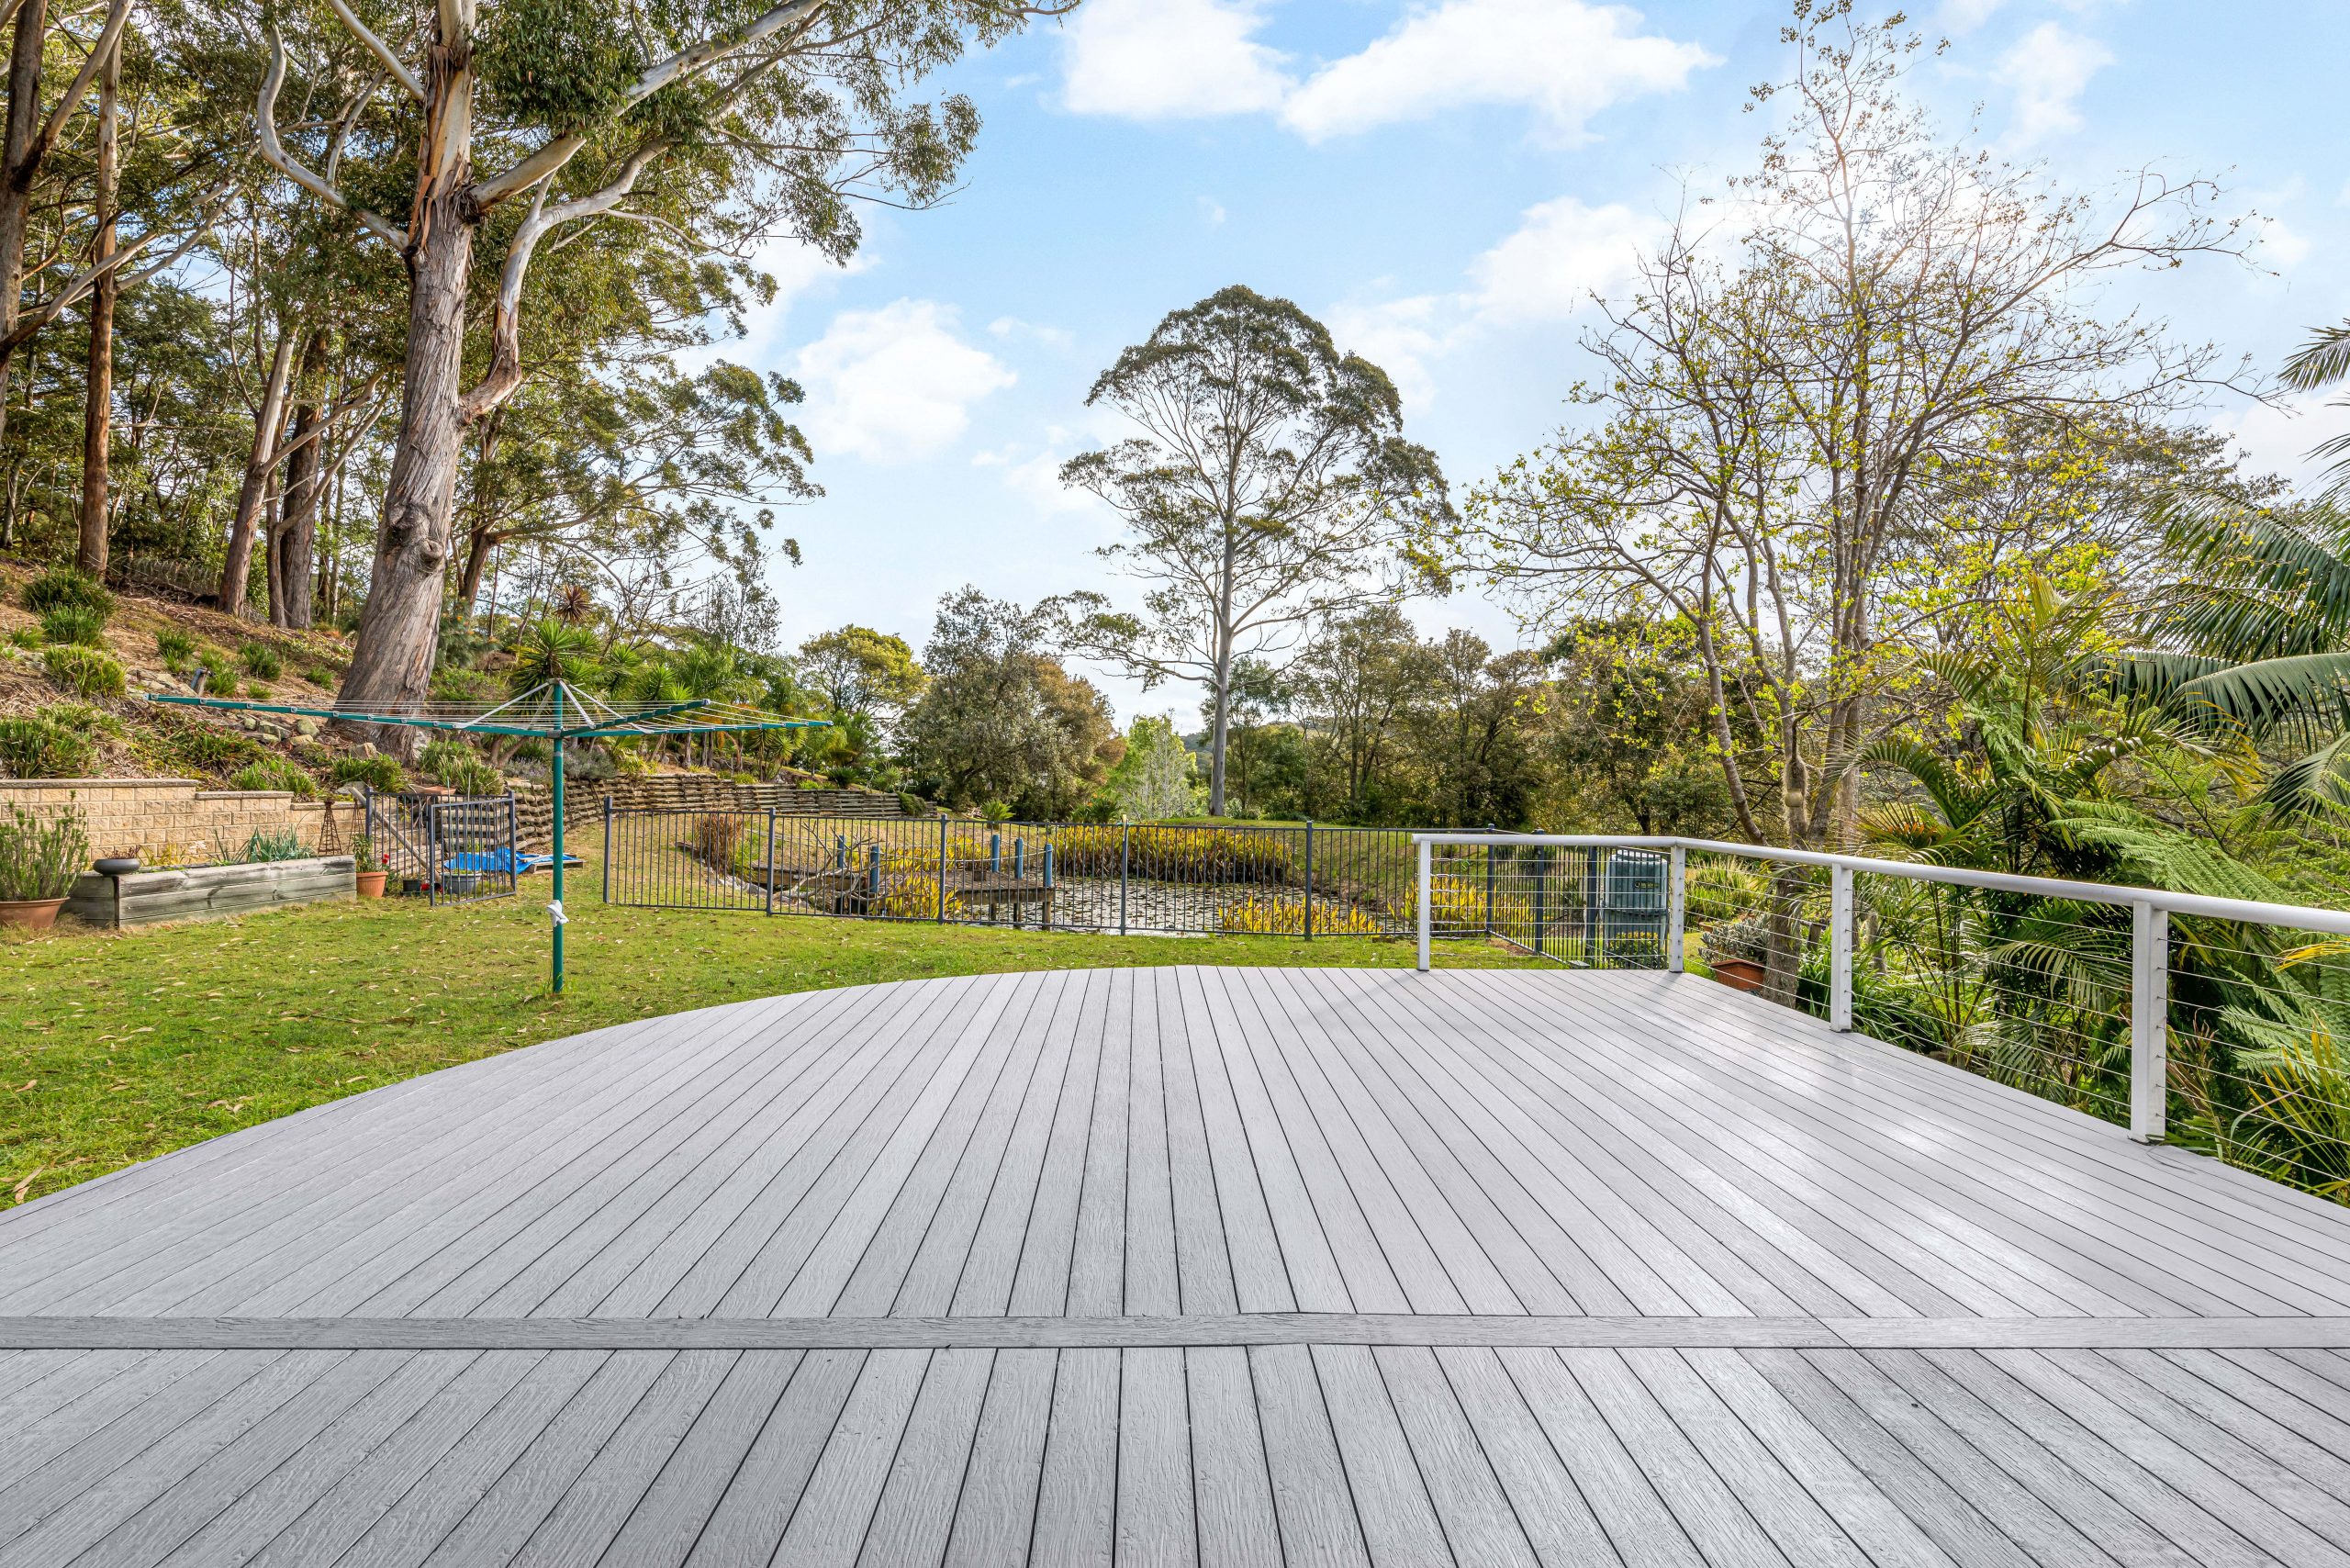 A large composite deck with trees in the distance